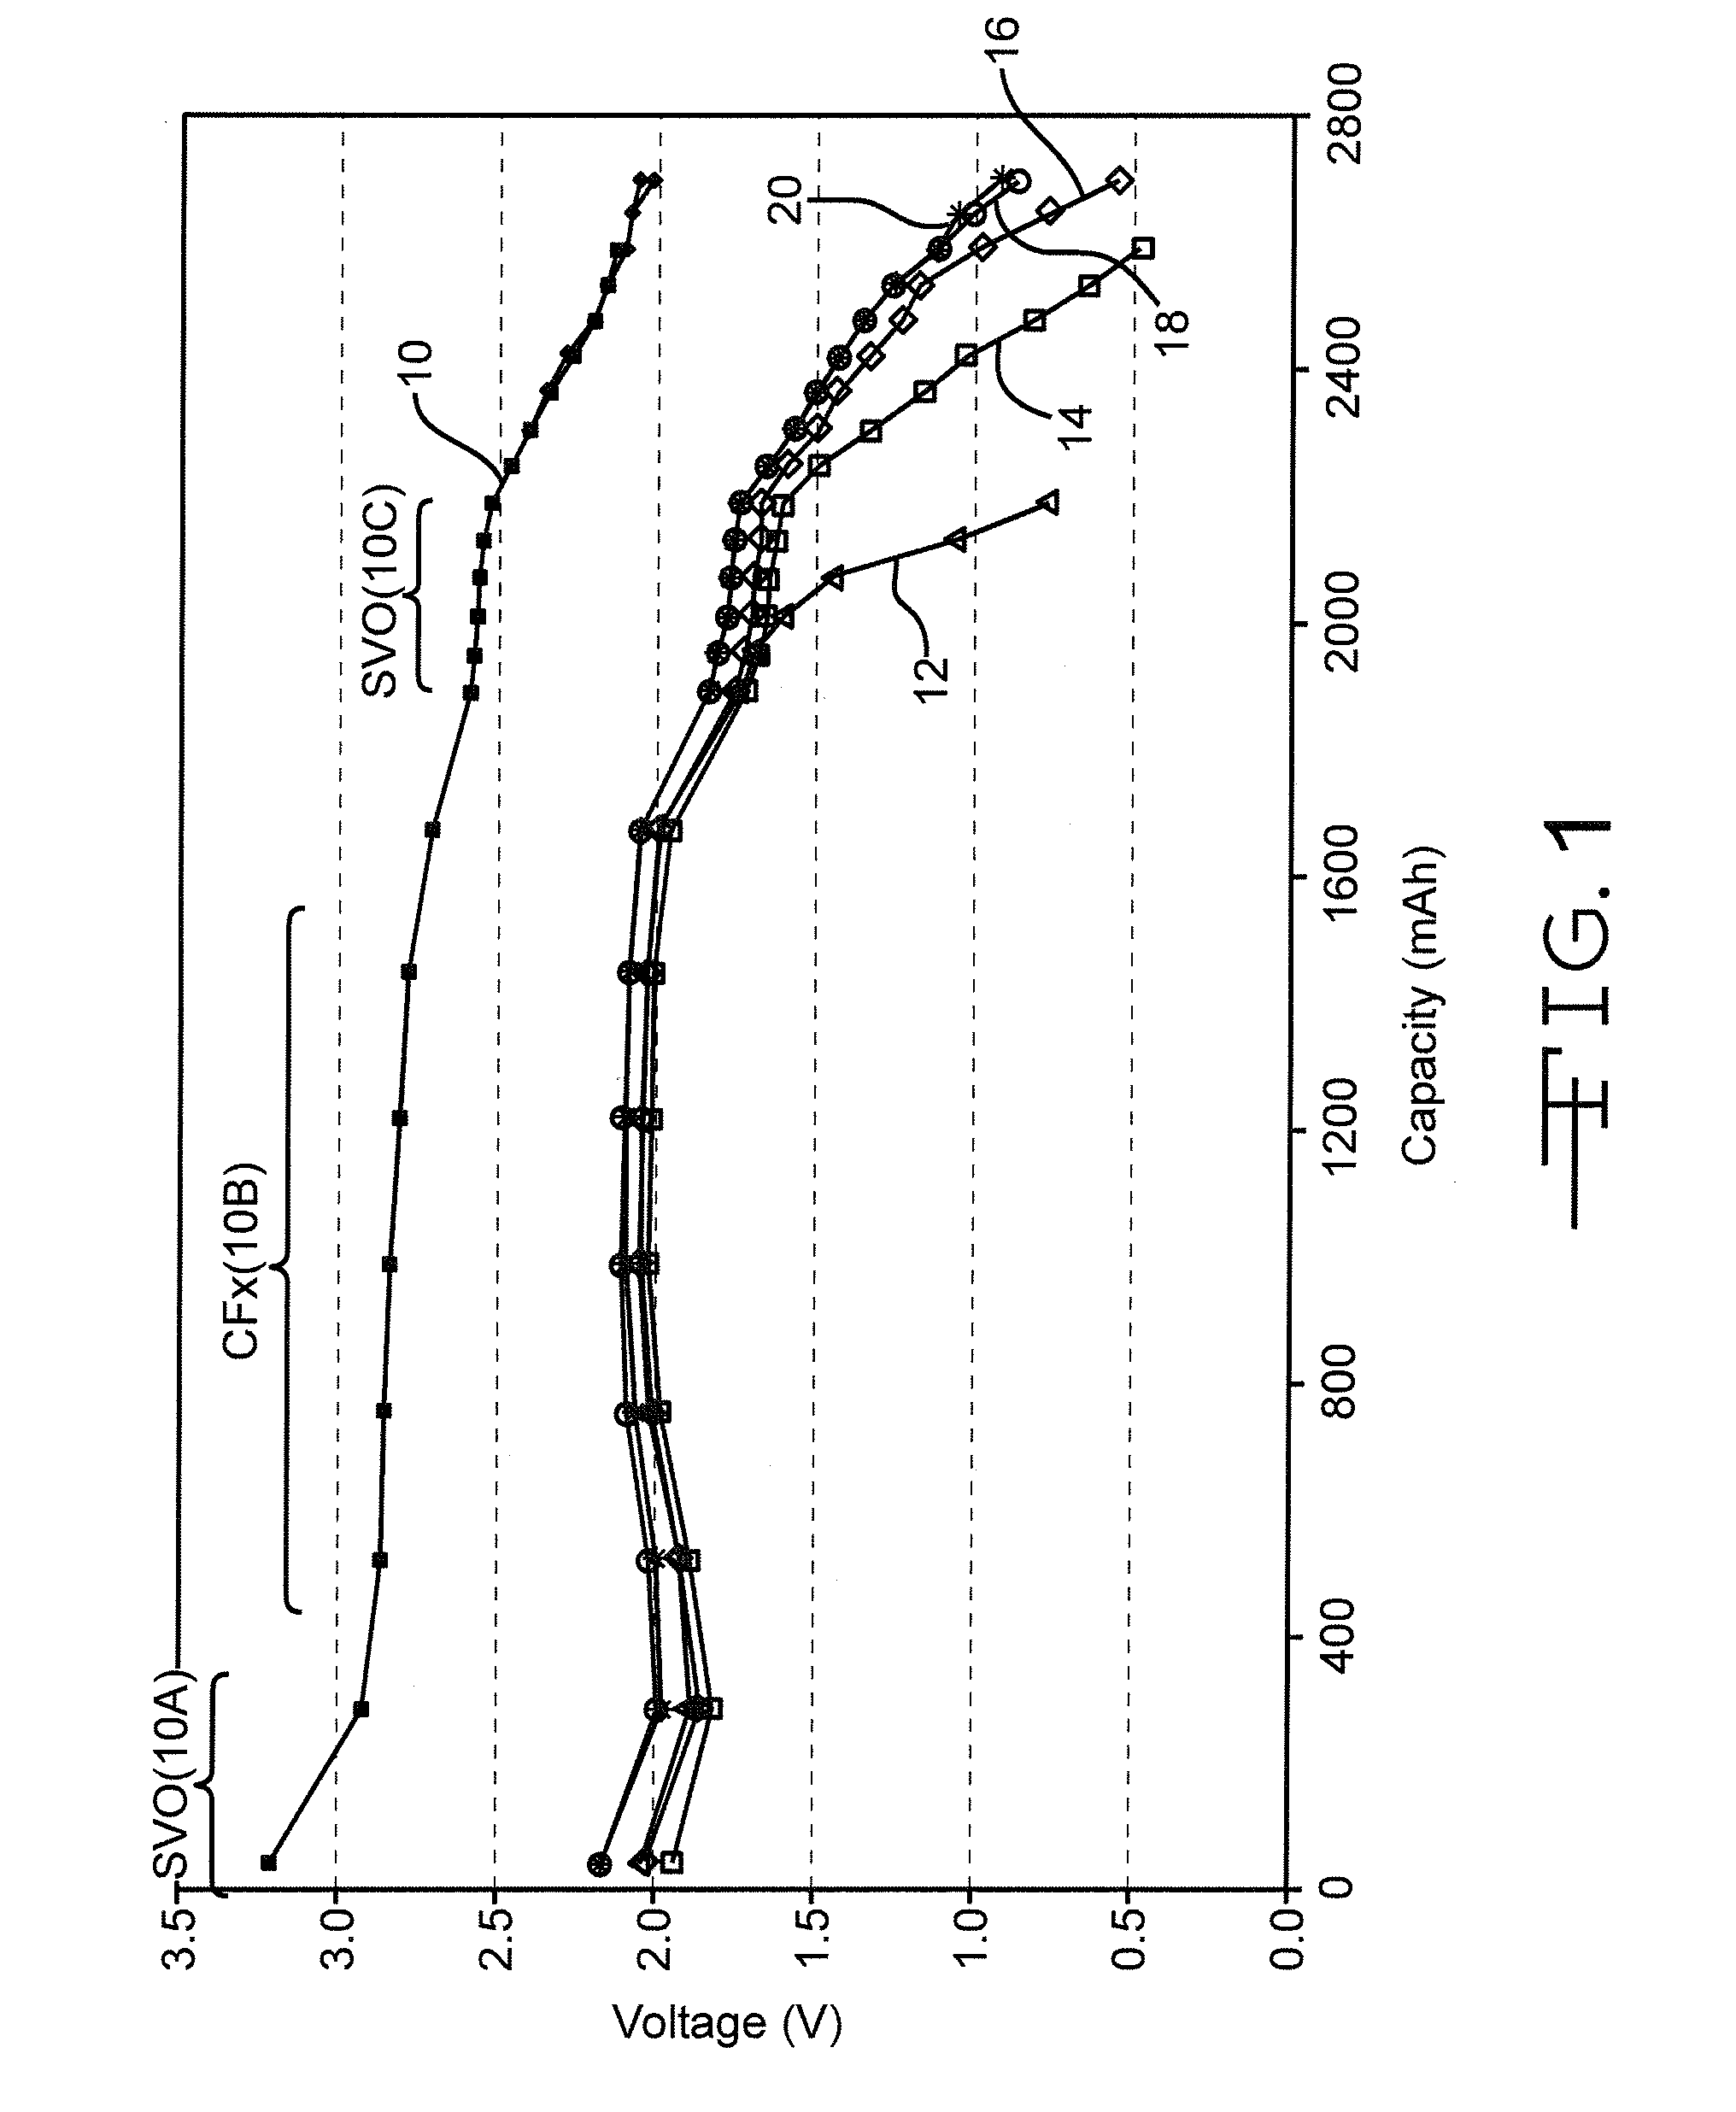 ANODE-TO-ANODE CAPACITY RATIOS FOR SVO/CFx HYBRID CATHODE ELECTROCHEMICAL CELLS